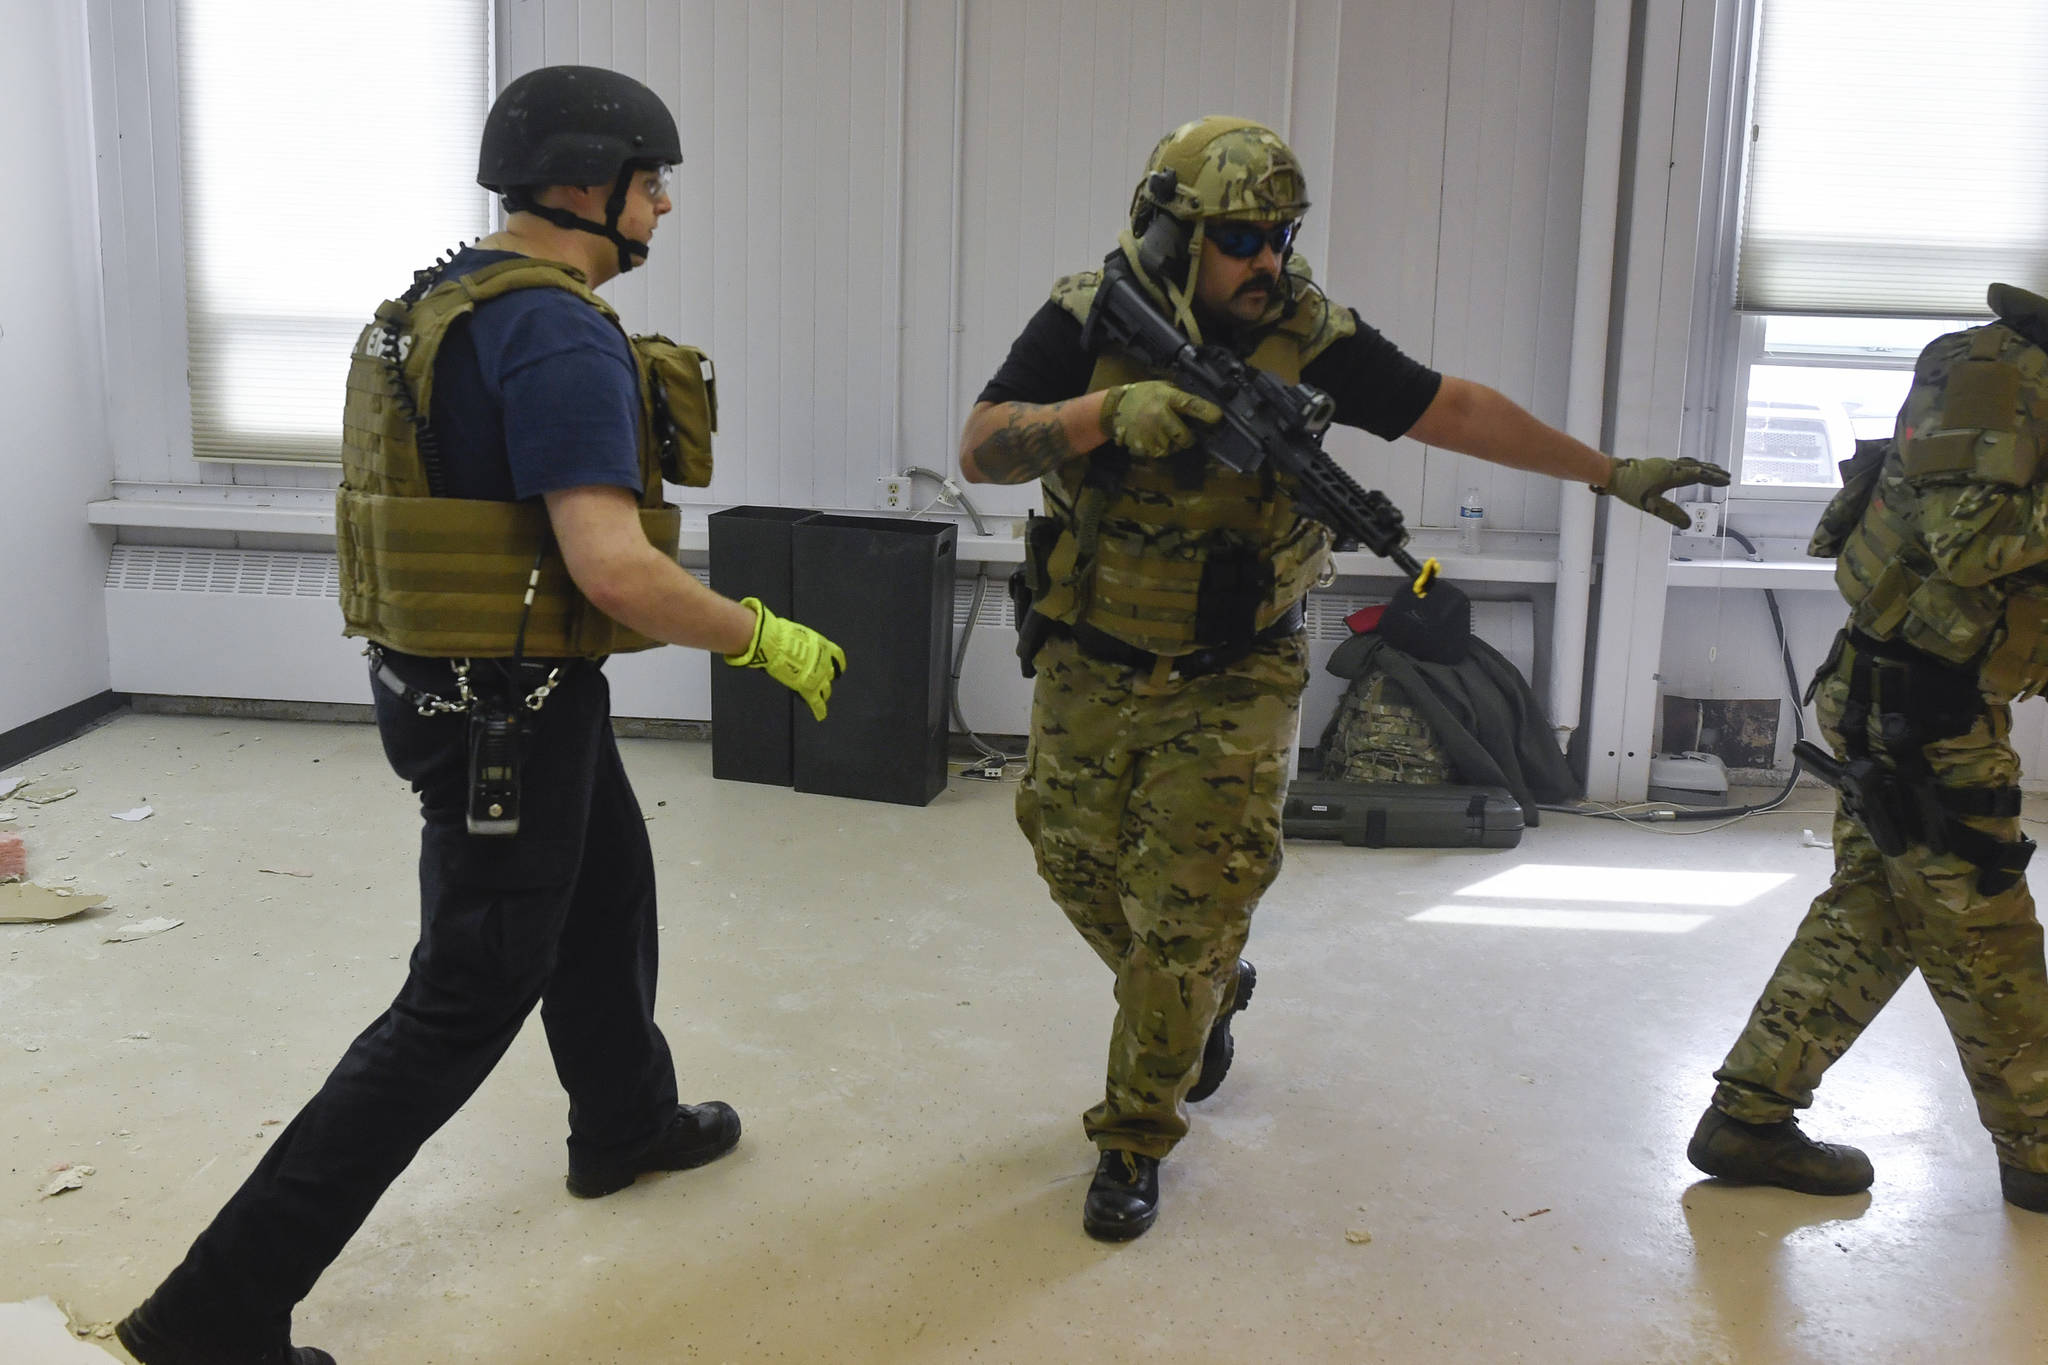 Juneau Police Department Officer Nick Garza, right, escorts Cory Hutchinson, of Capital City Fire/Rescue, as they conduct a joint training exercise at the former Public Safety Building on Whittier Street on Tuesday, April 16, 2019. The training is designed to boost collaboration between CBJ law enforcement and emergency medical personnel. (Michael Penn | Juneau Empire)